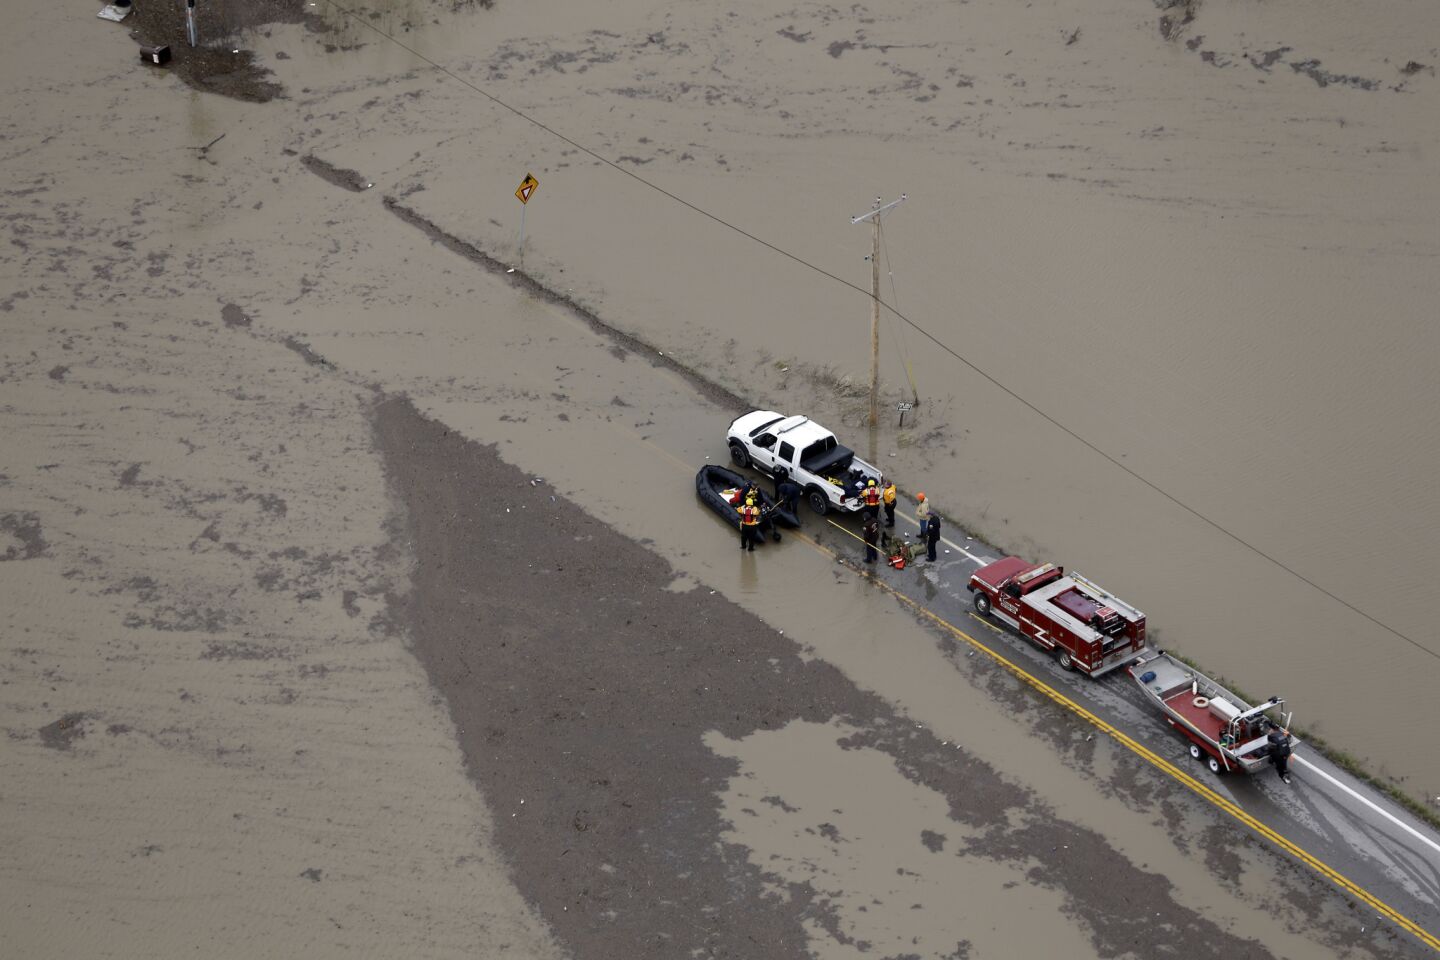 Rescue personnel stage operations on a flooded road in West Alton, Mo.